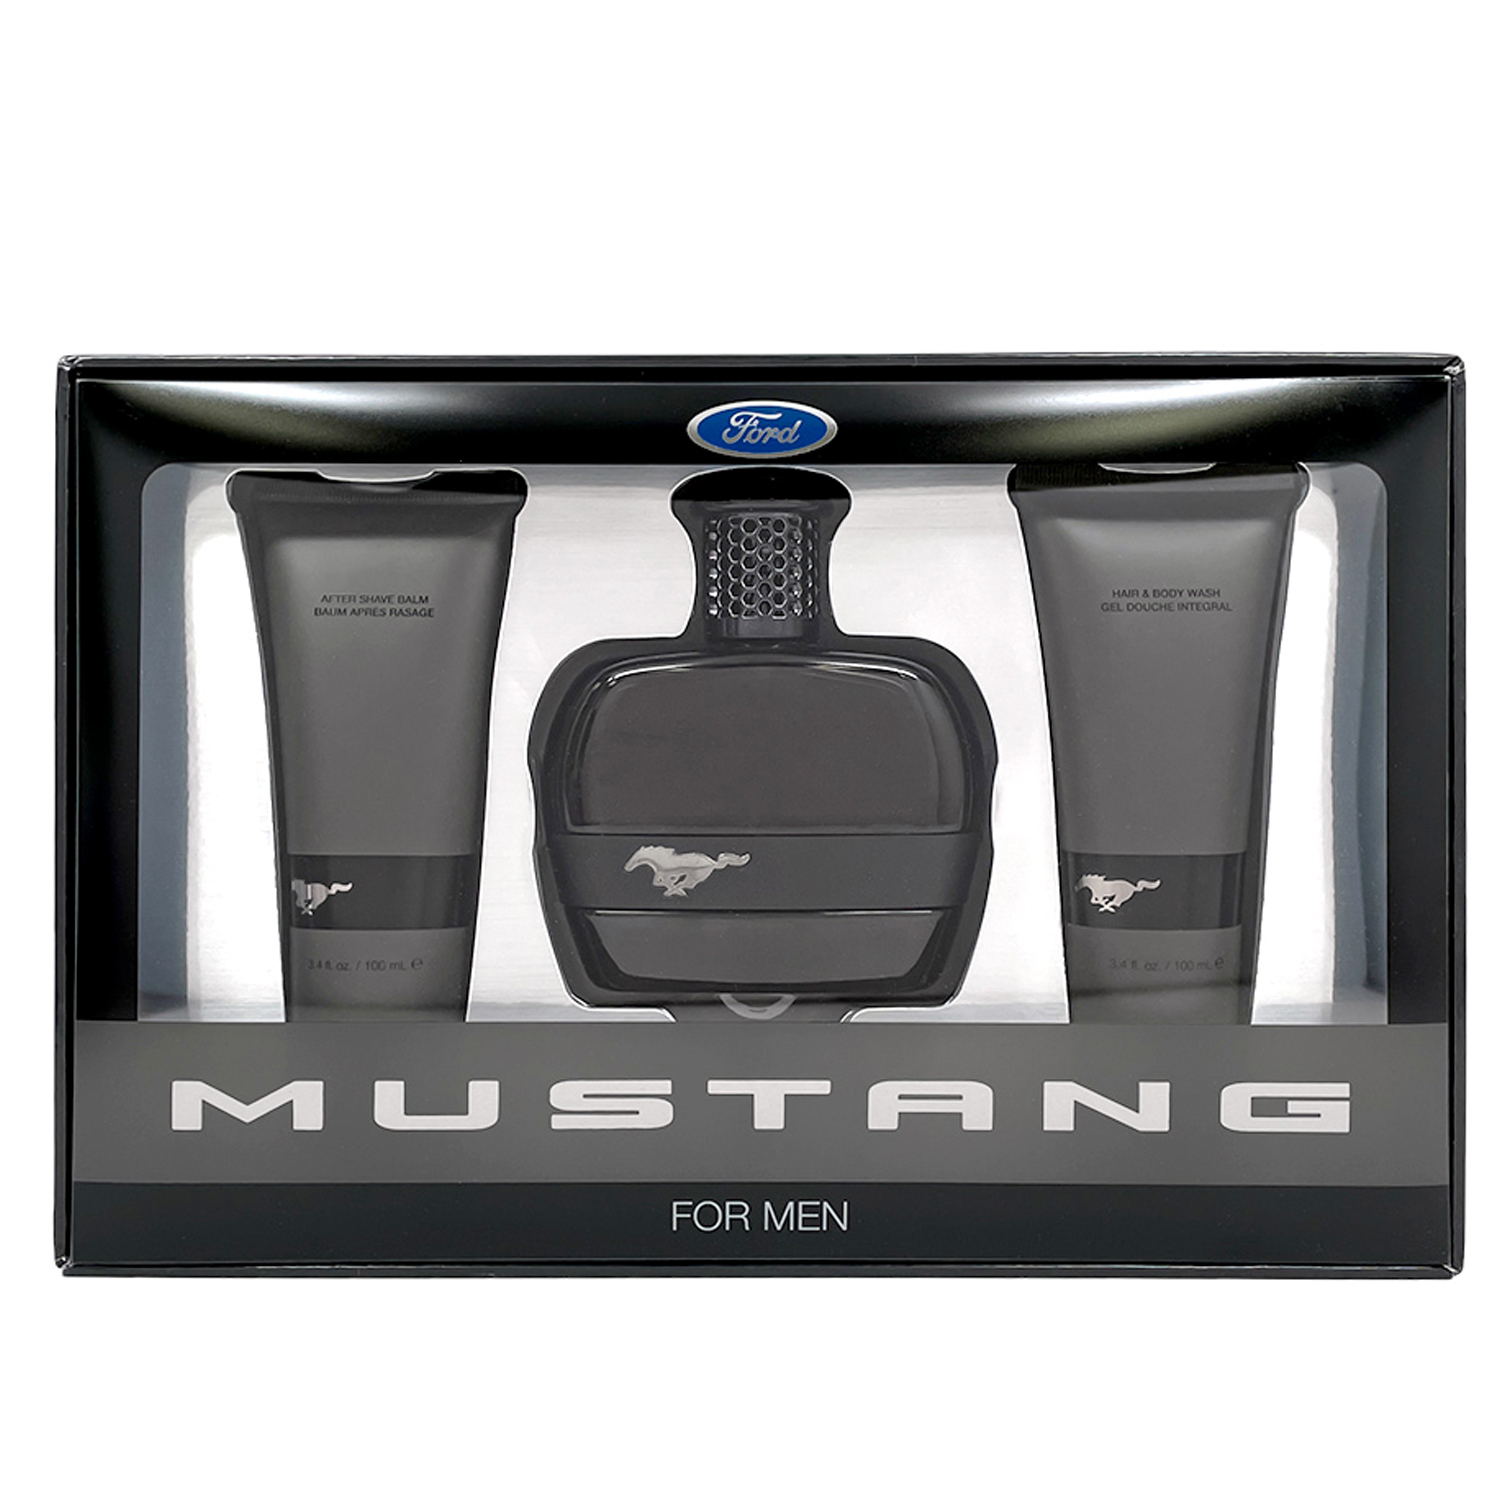 Mustang - Edt/3.4 Oz Set / - 3.4 3.4 Balm Shave Body and Hair Oz After Bridge Black Wash Beauty Oz